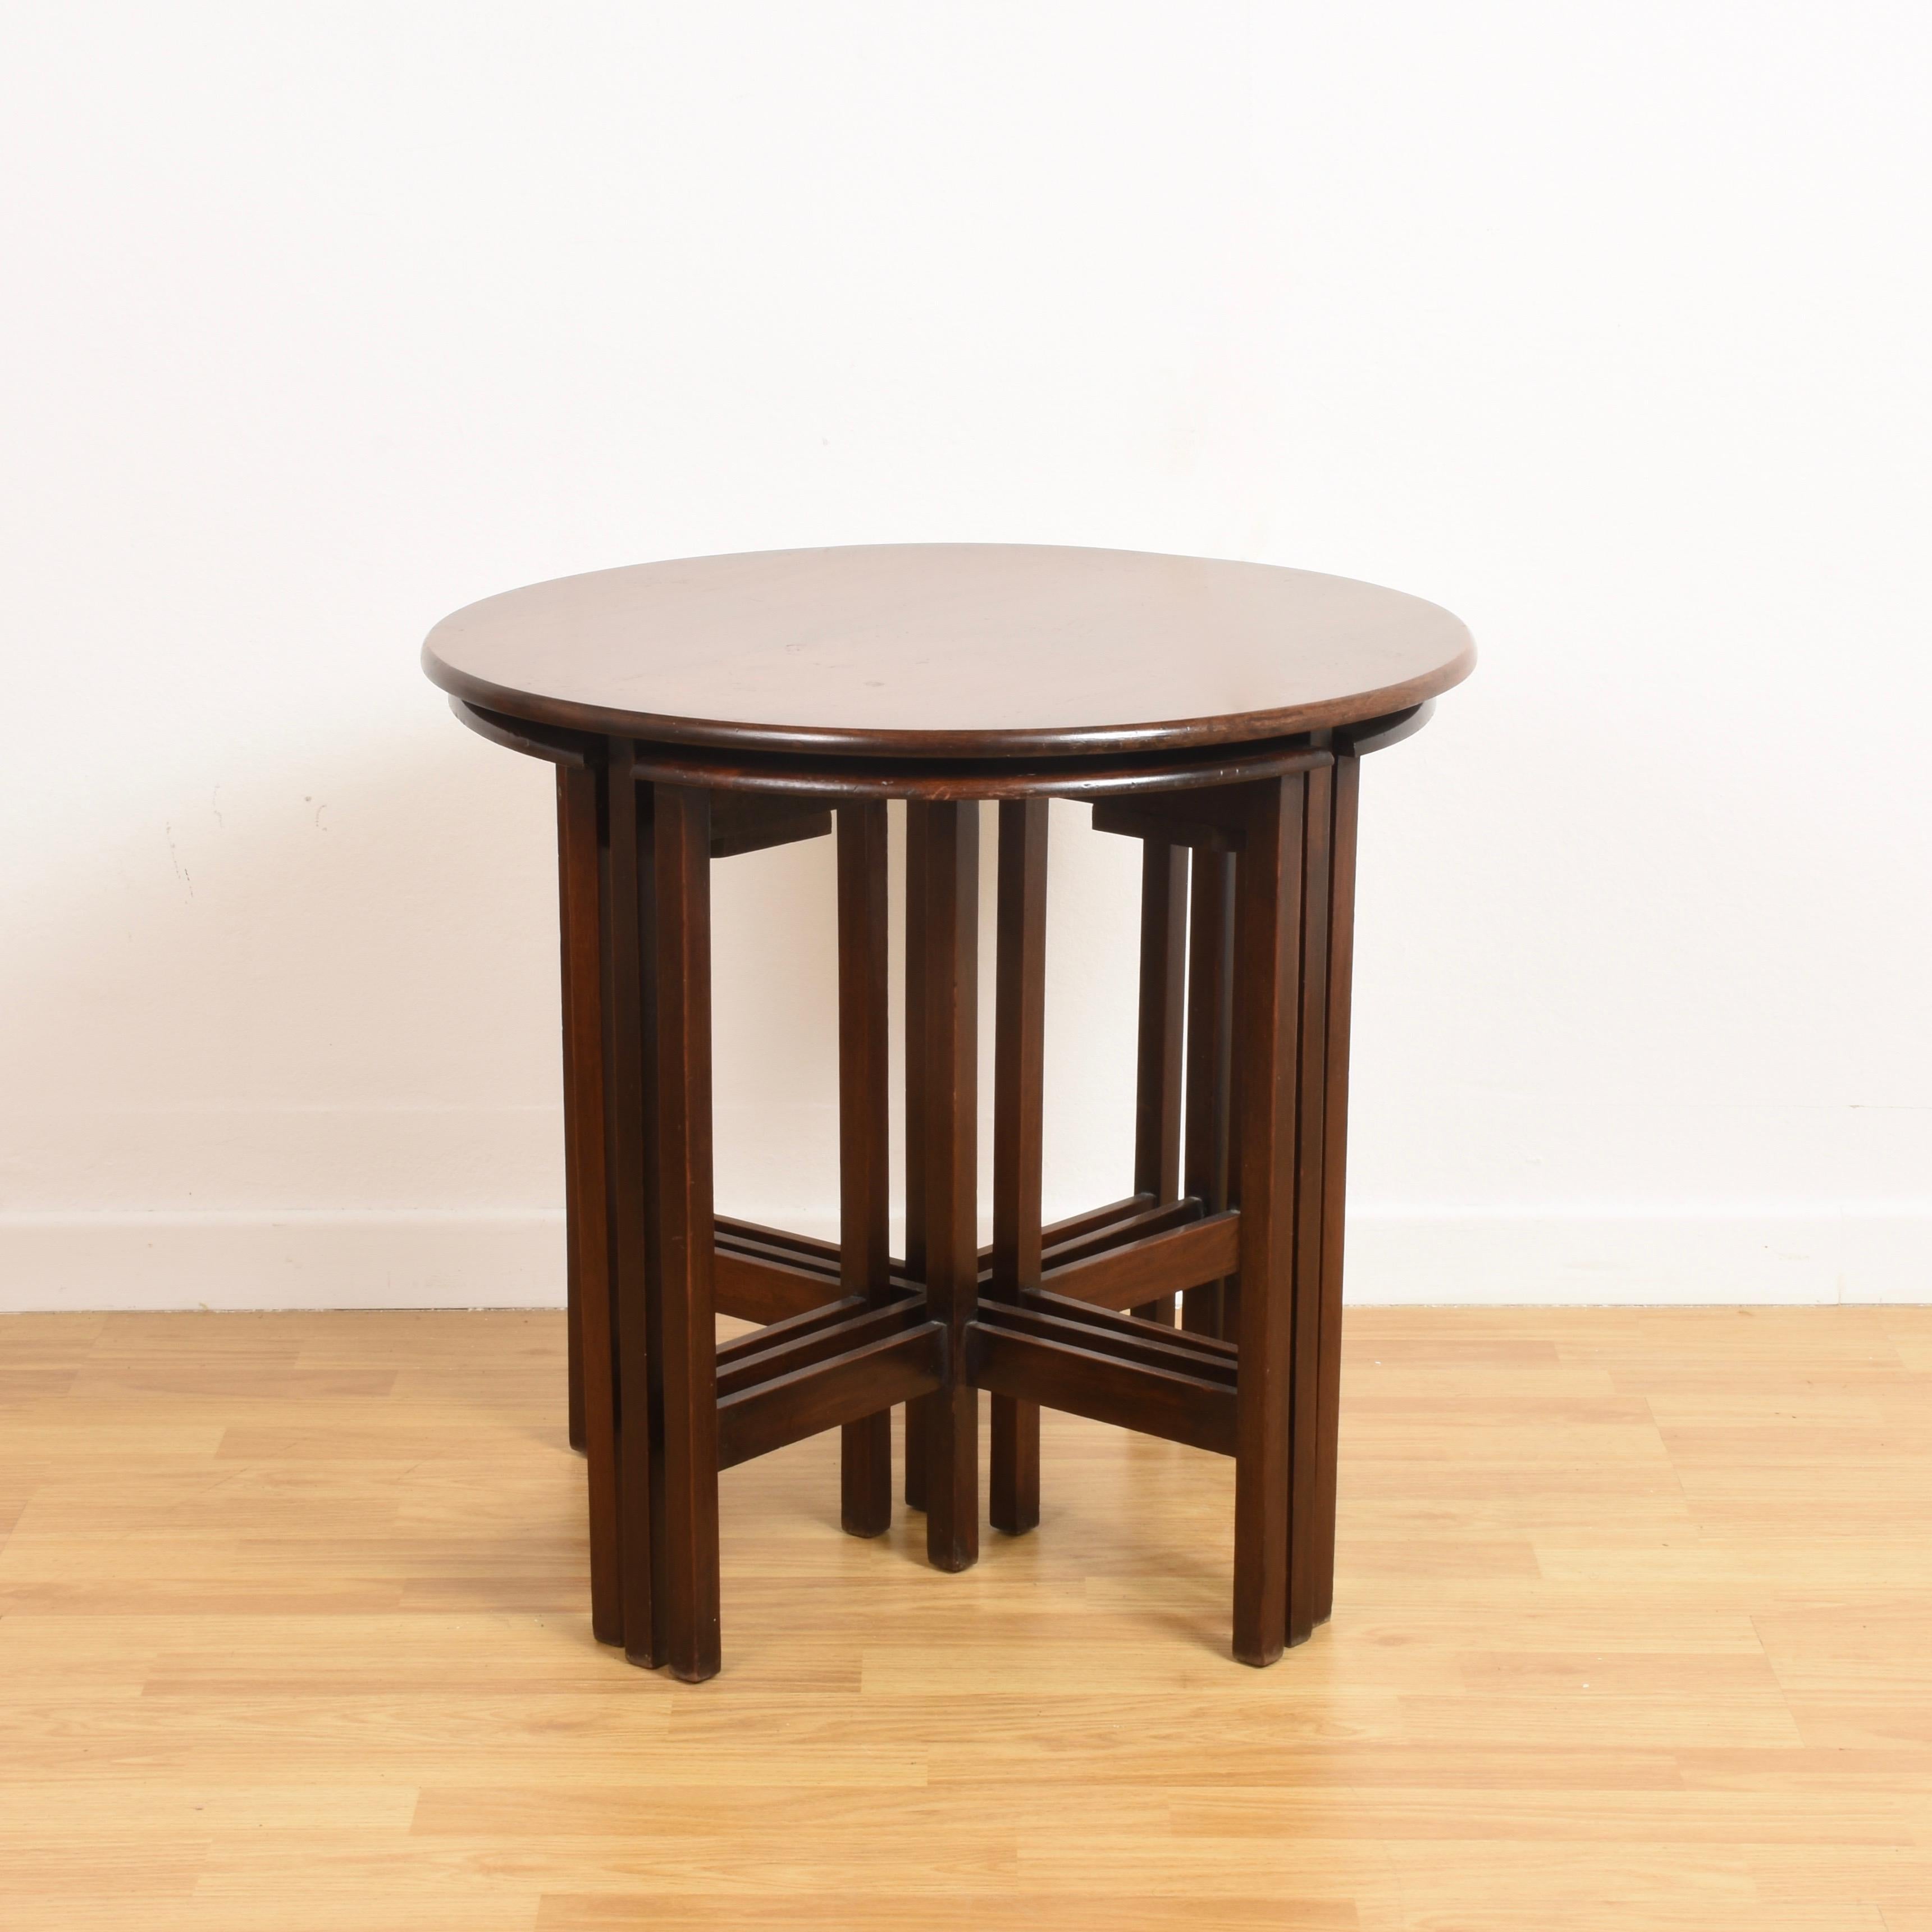 Italian Nest of Five Vintage in Mahogany Tables, Italy, 1970s End Table